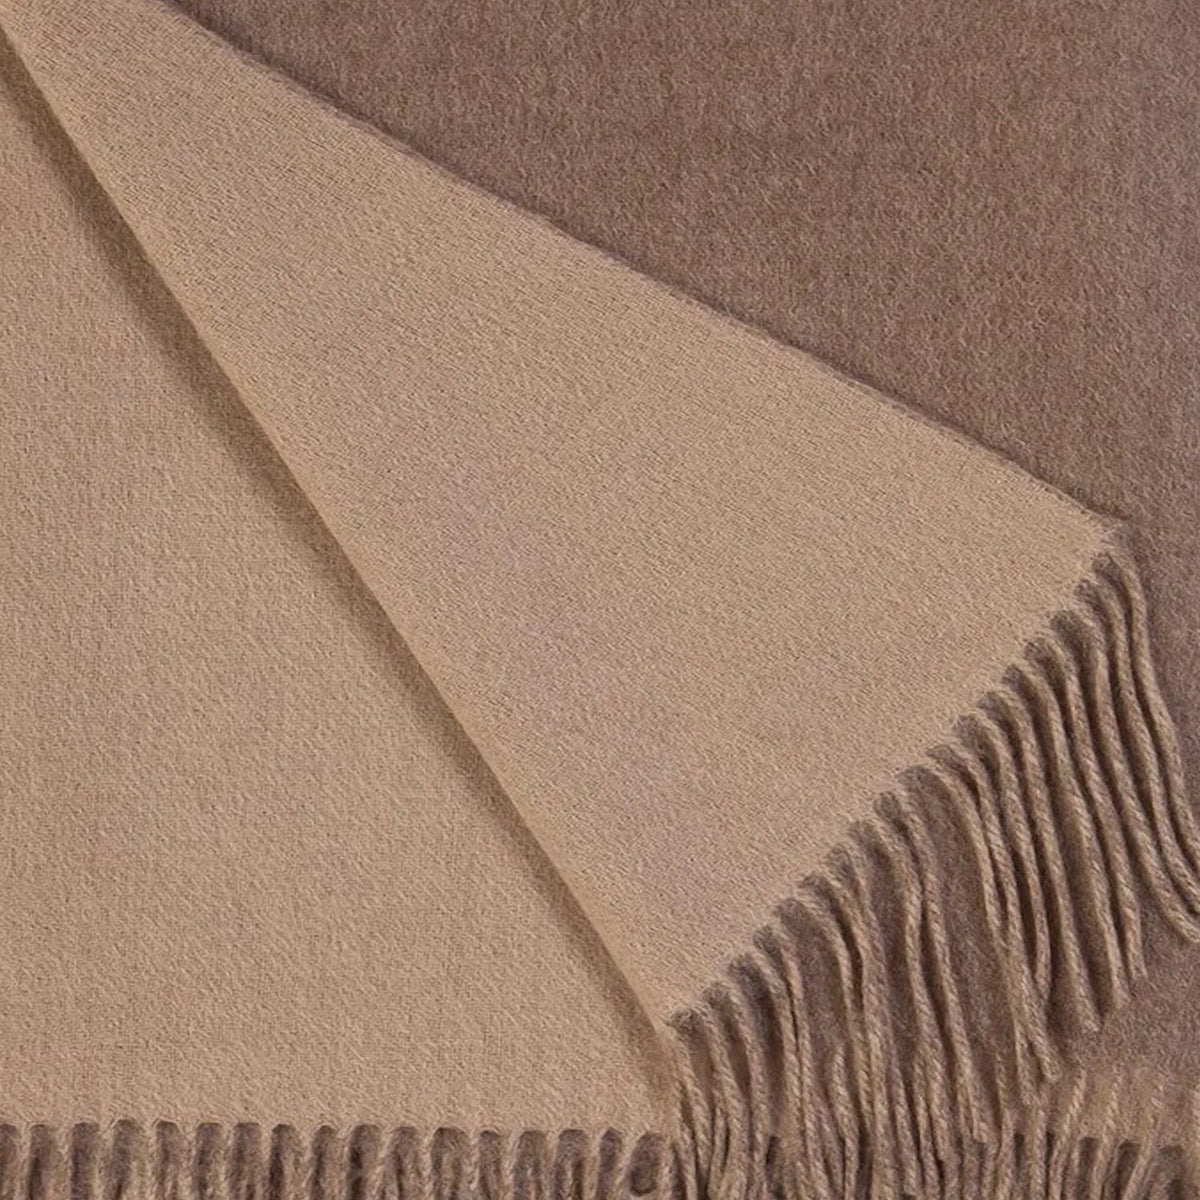 Fabric closeup of Alashan Double Faced Classic Cashmere Blend Throw - Mushroom/Bisque color